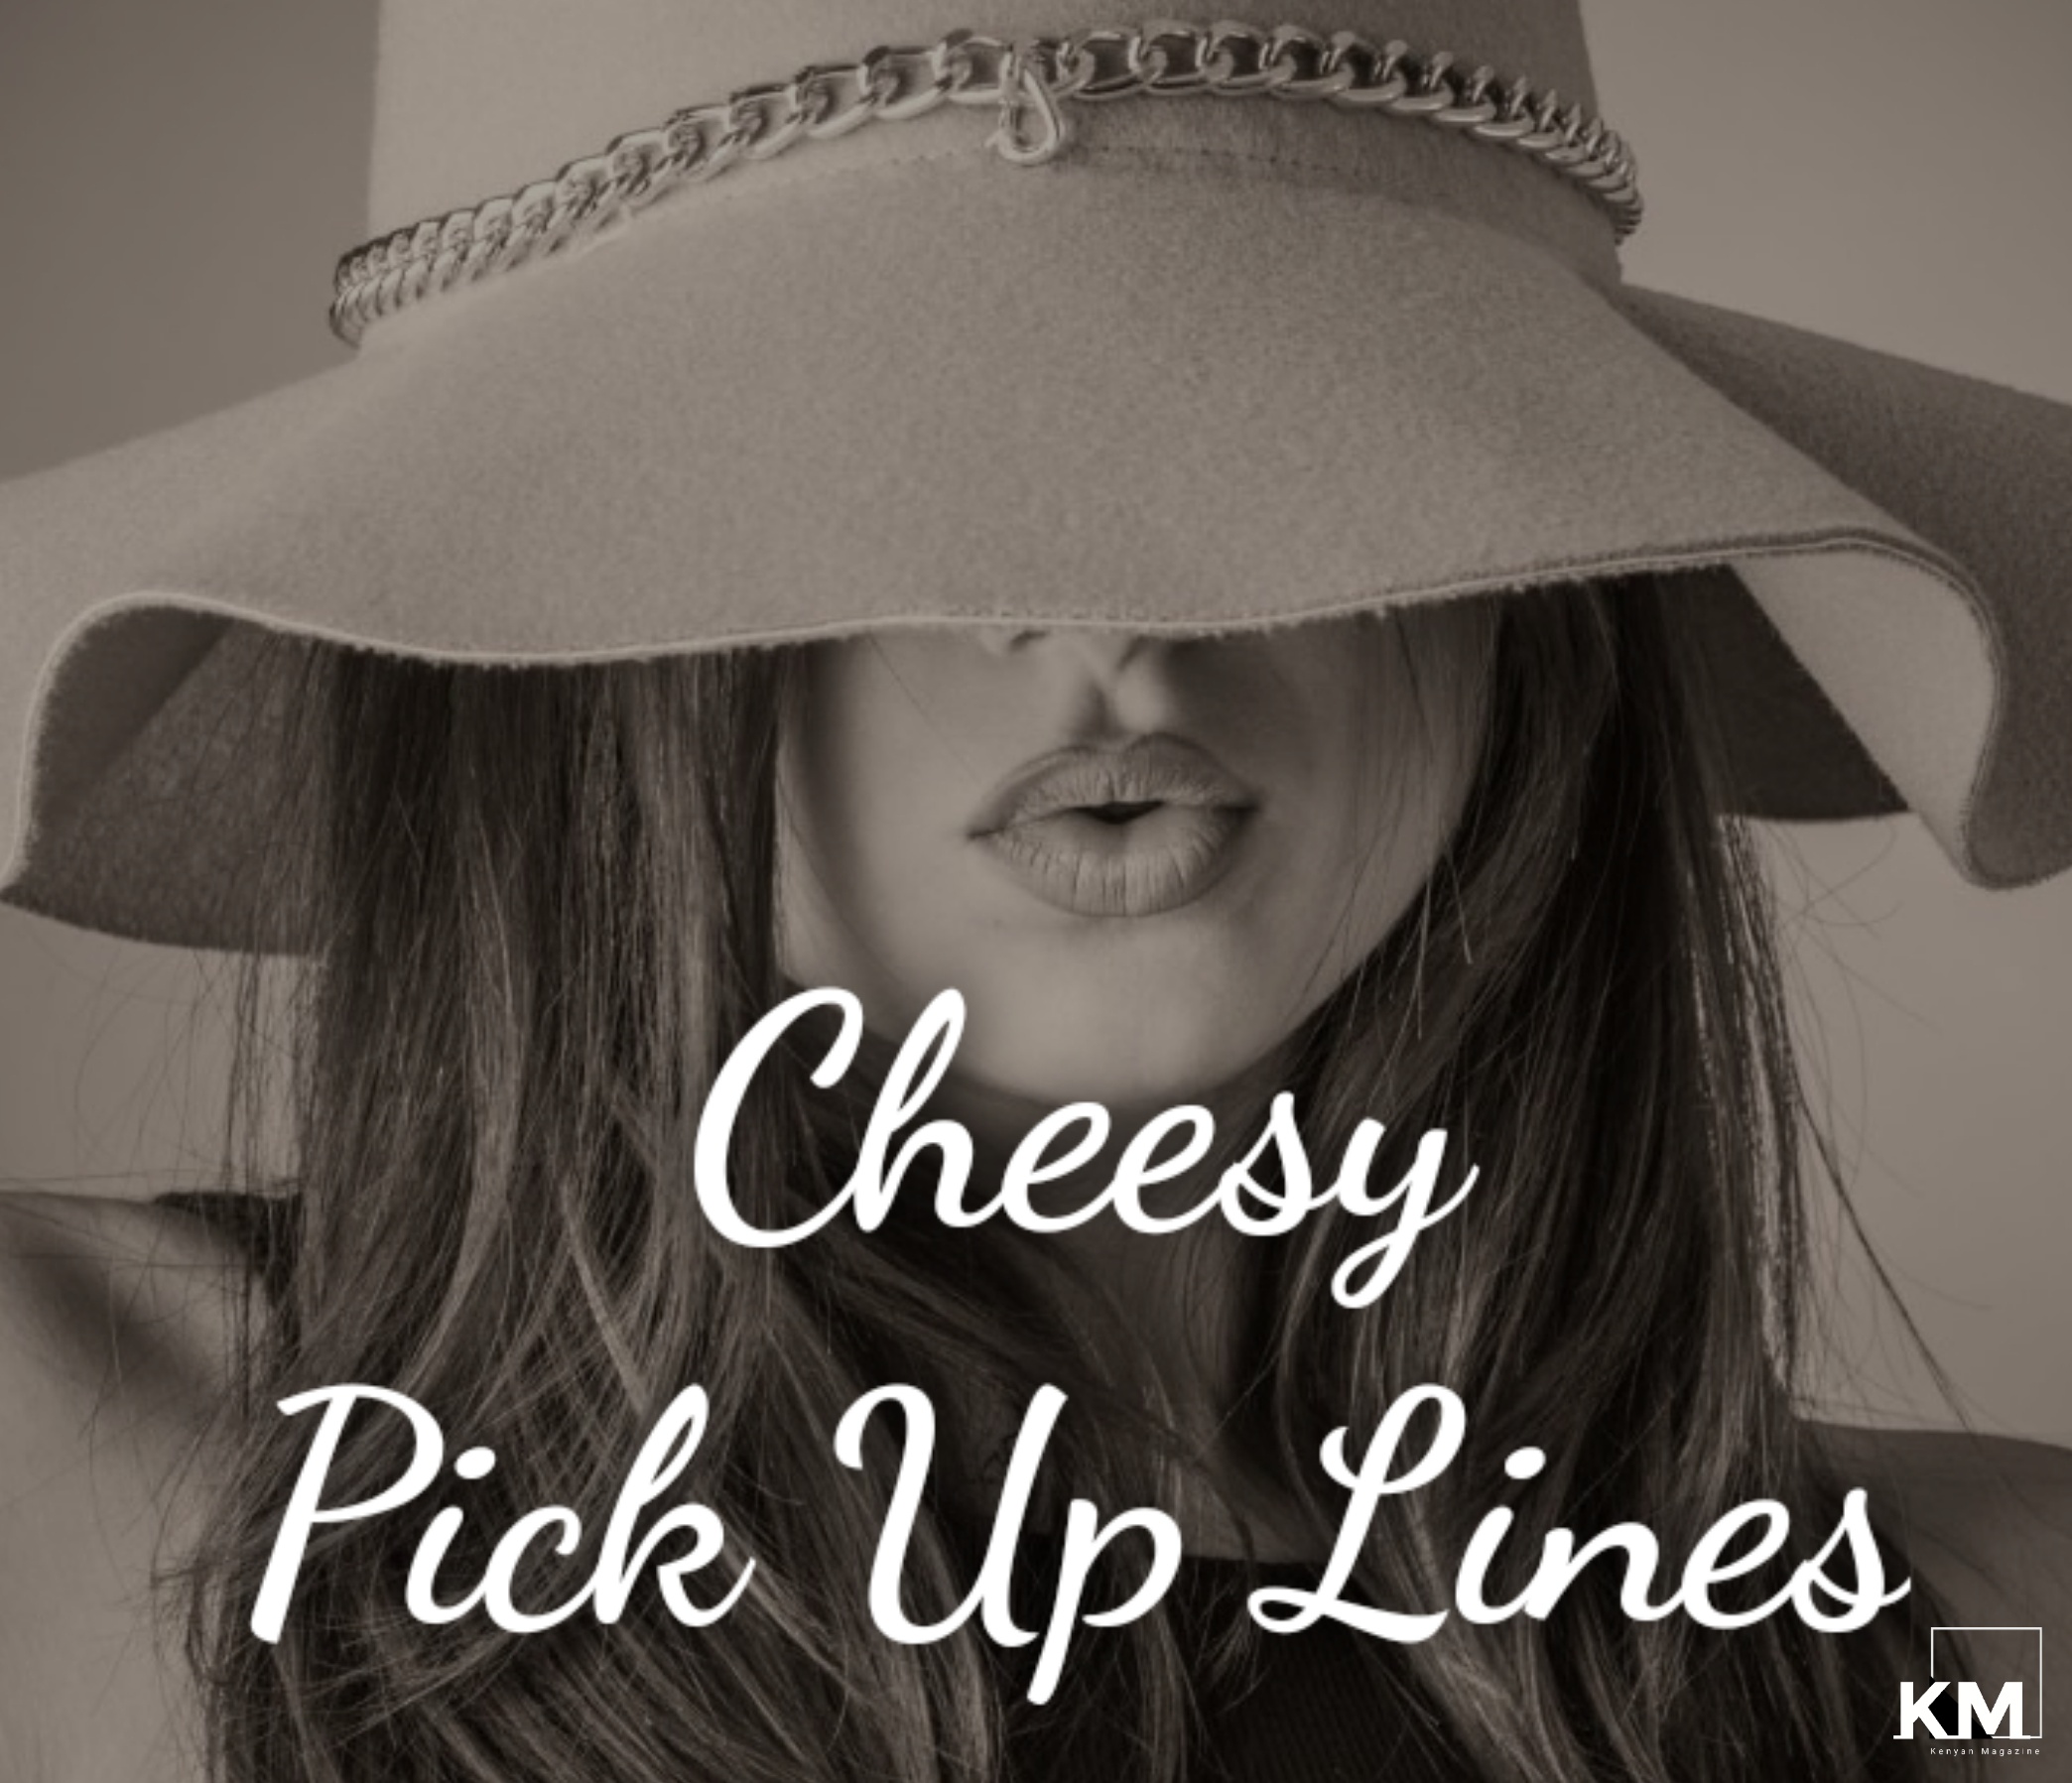 Cheesy pick up lines